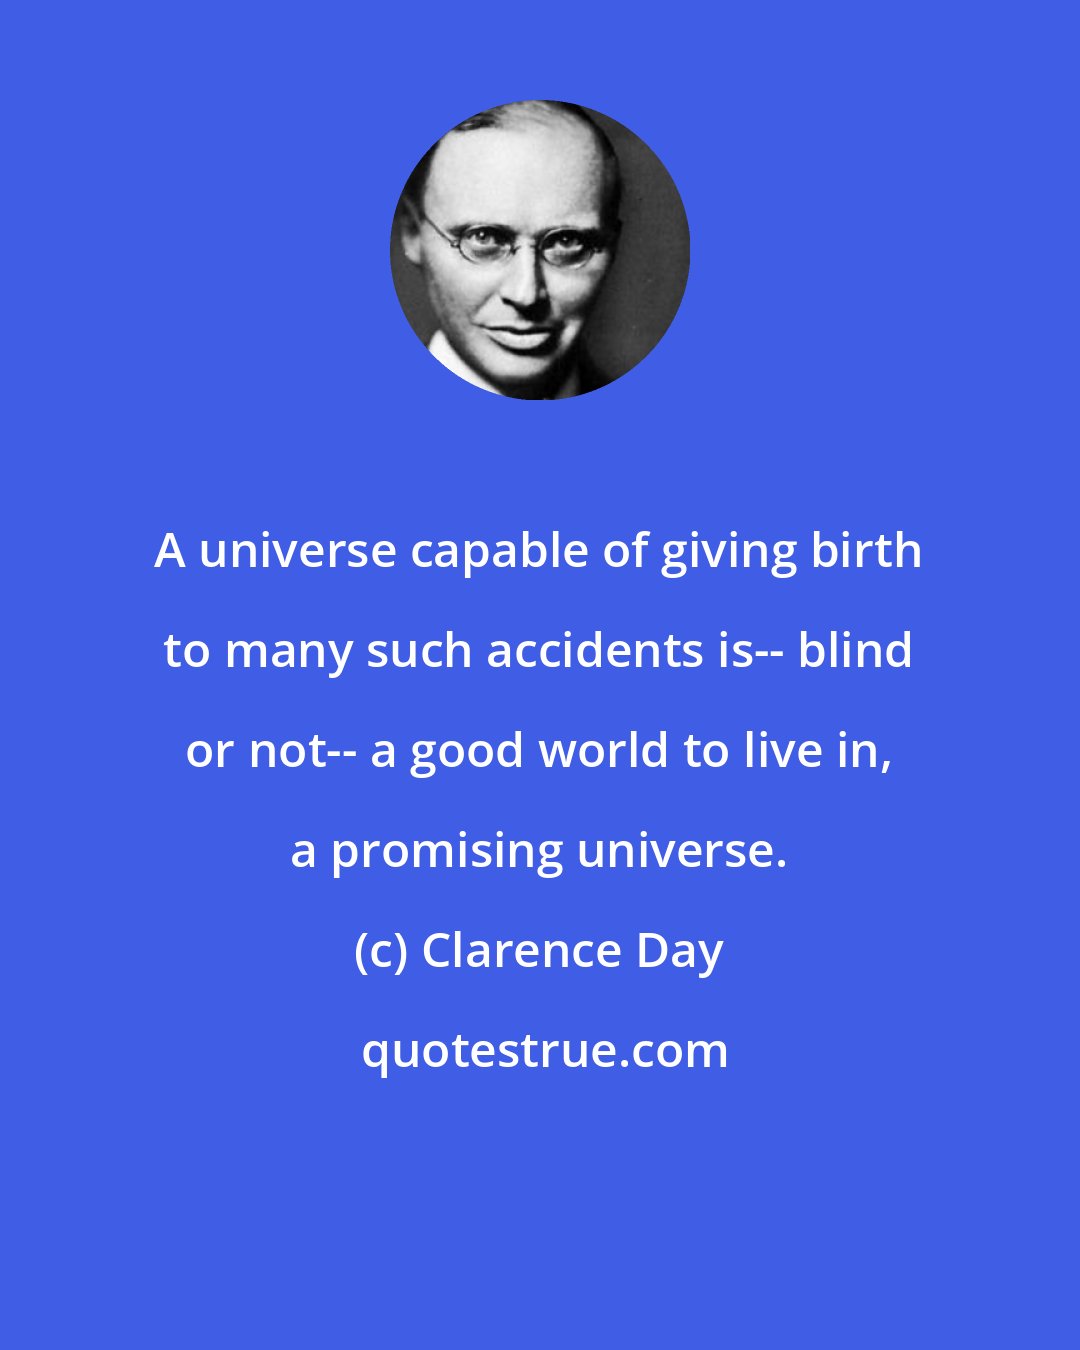 Clarence Day: A universe capable of giving birth to many such accidents is-- blind or not-- a good world to live in, a promising universe.